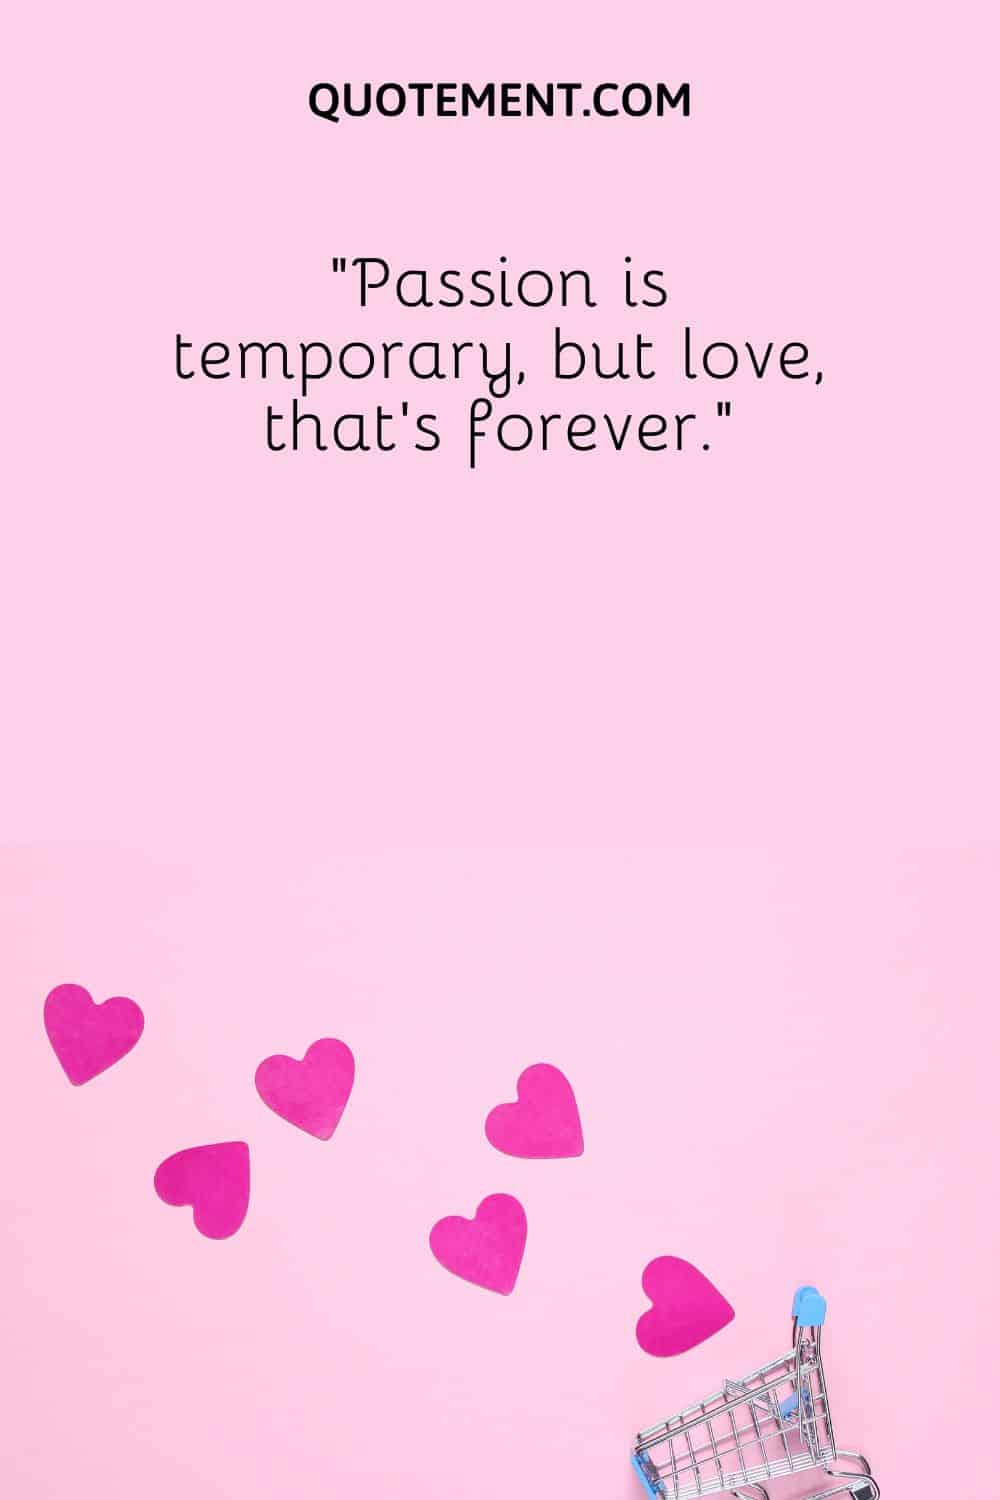 “Passion is temporary, but love, that’s forever.”